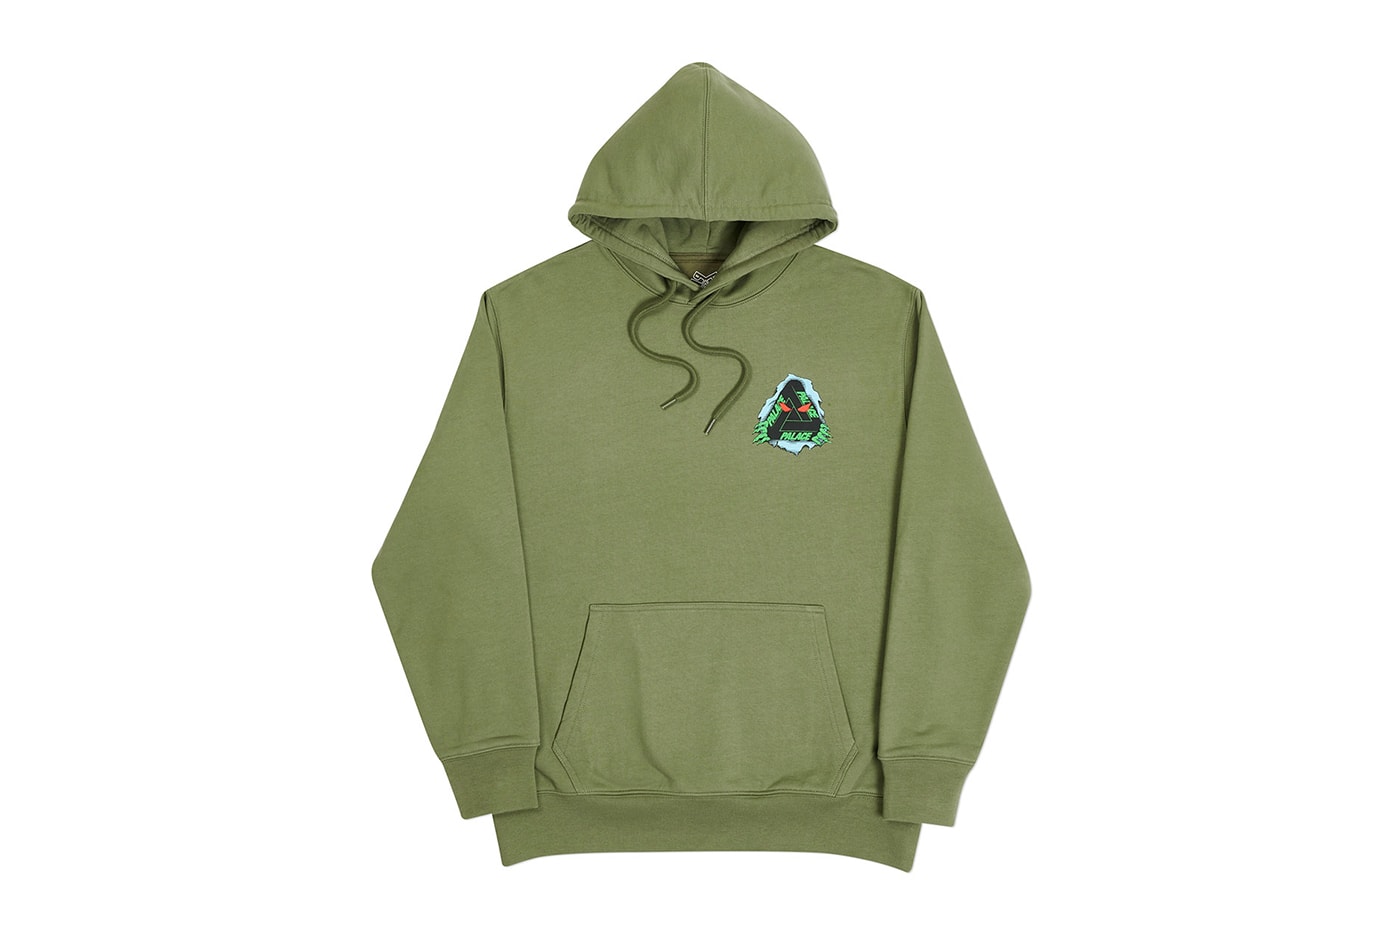 Palace Winter 2020 Sweatshirts and Hoodies tri ferg collection drop info